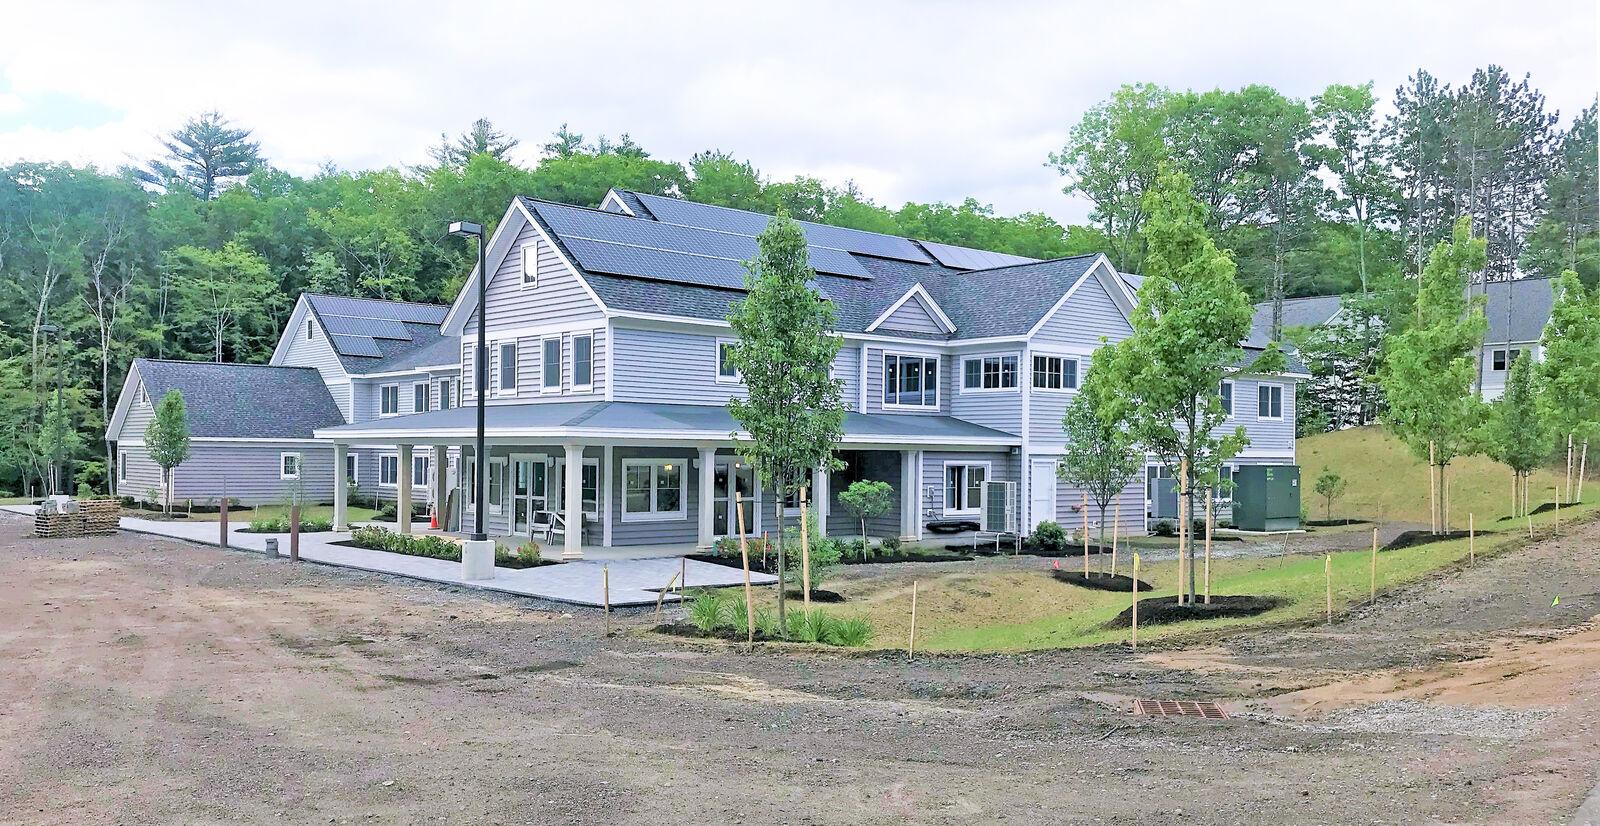 New Senior Apartment Project Becomes First in NH to Meet Passive House Standard